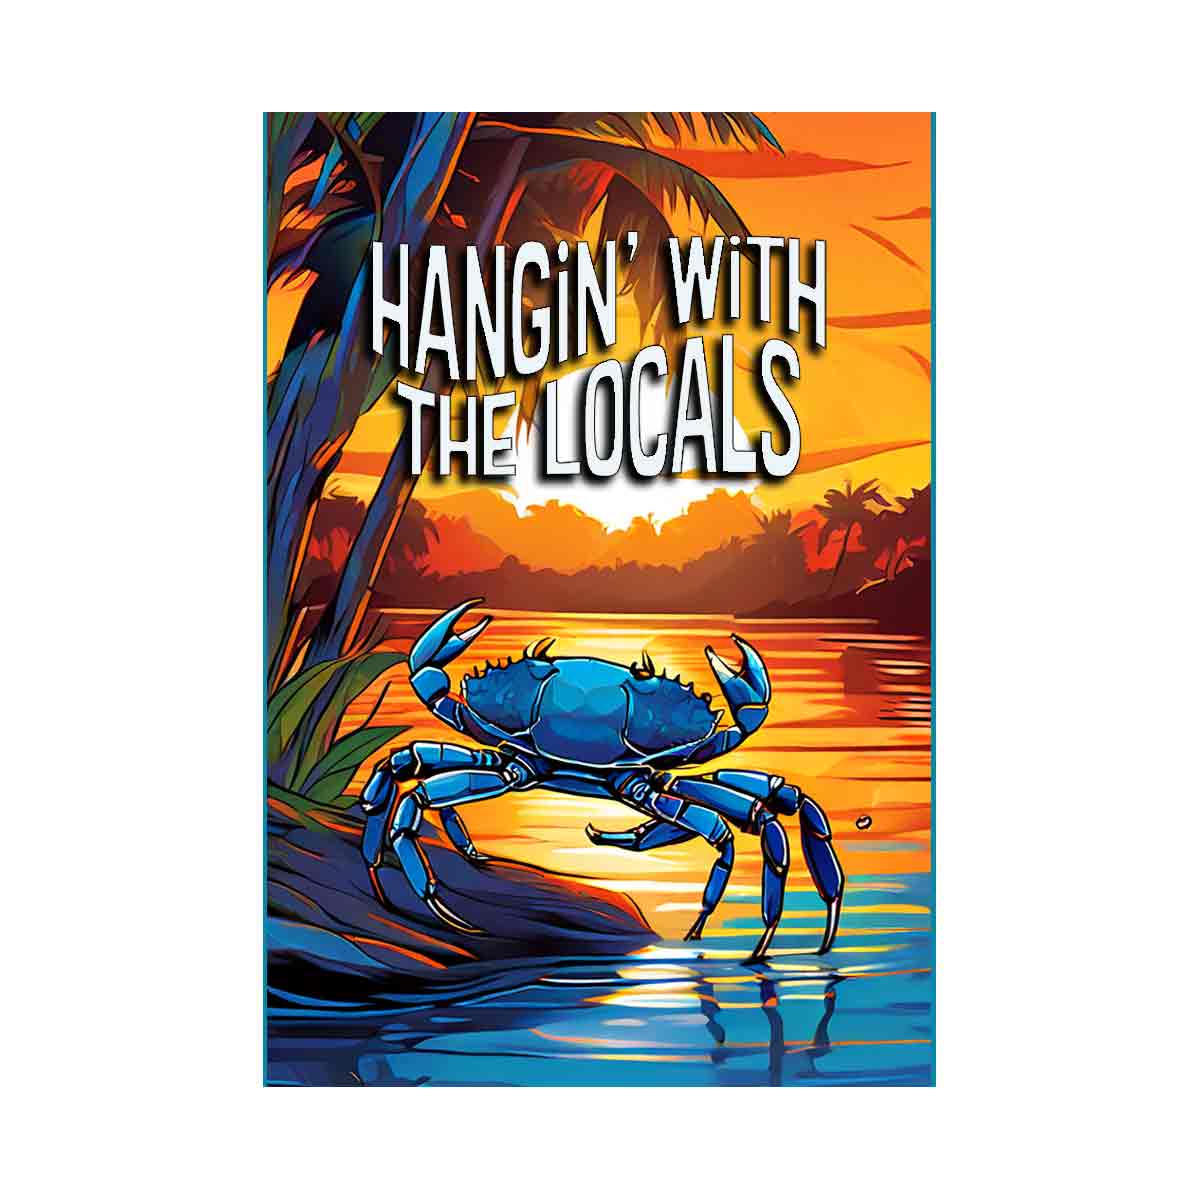 Hangin' with the locals - Blue Crab